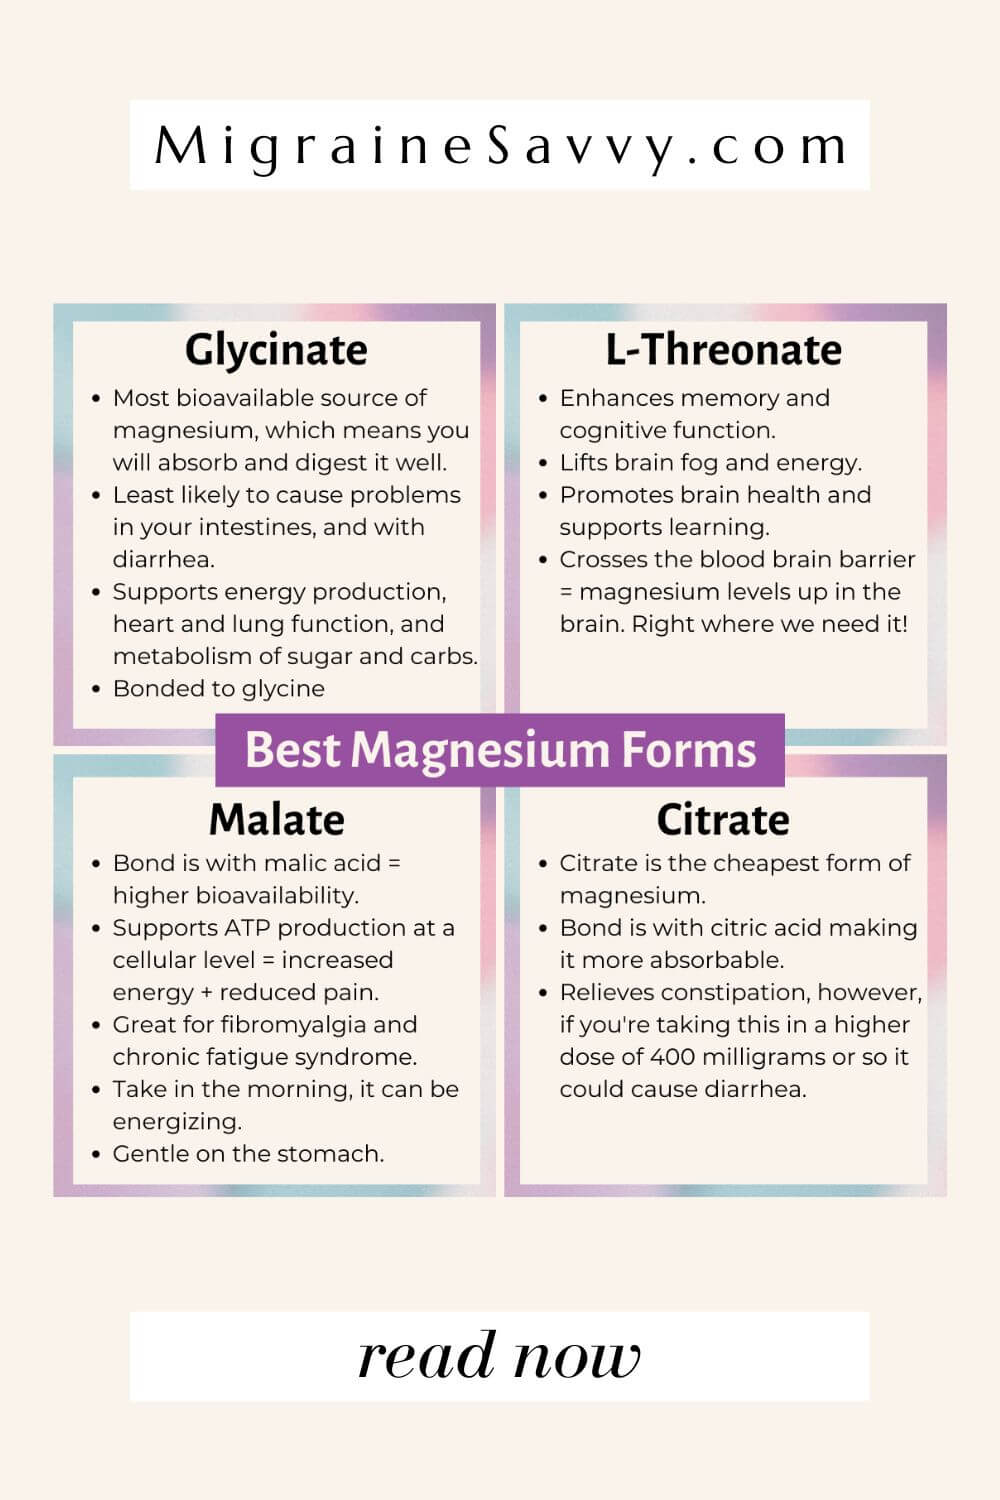 Which Magnesium is Best for Migraines?